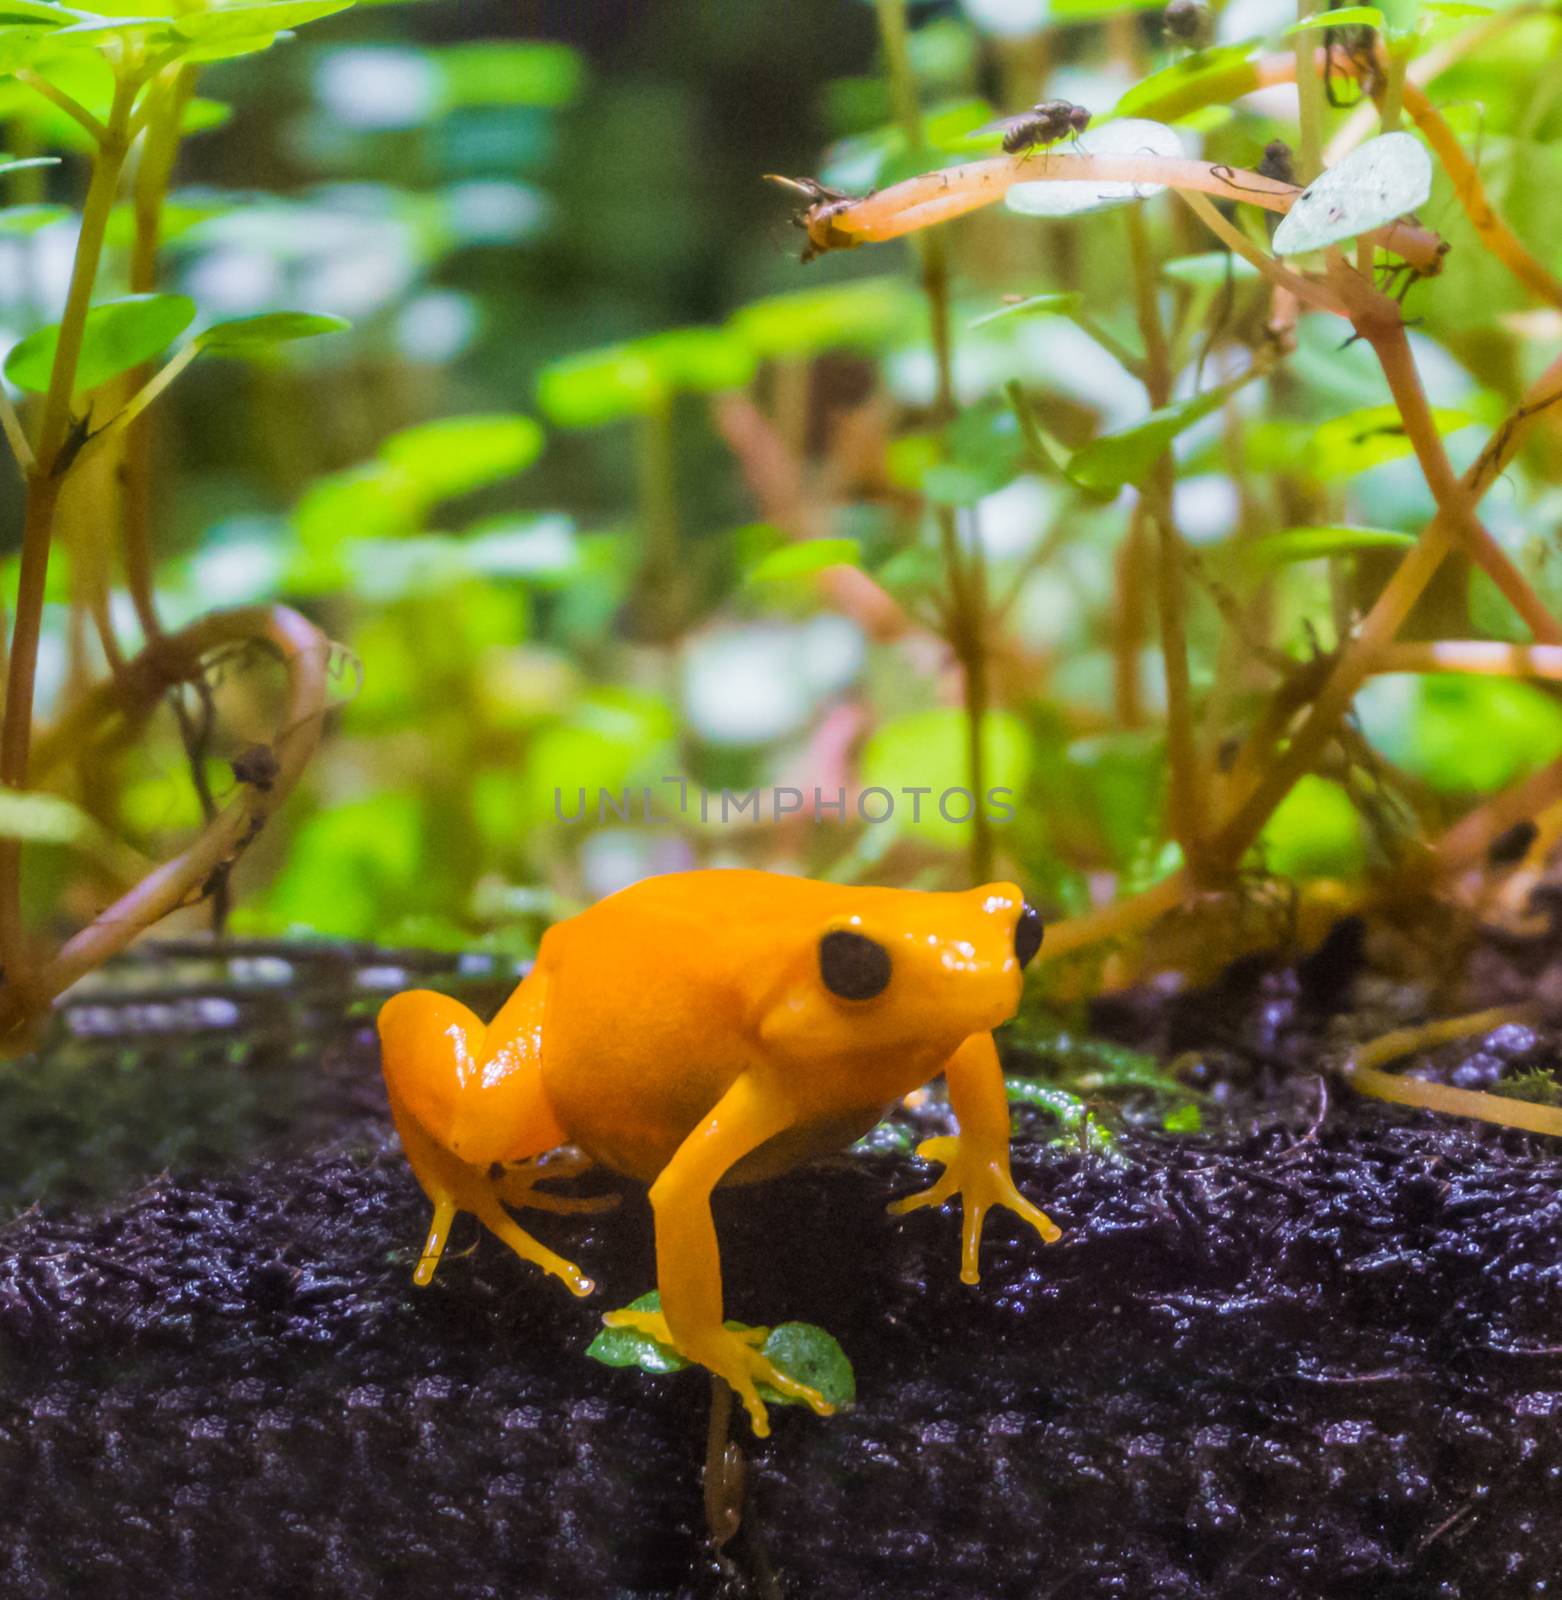 yellow poison dart frog a dangerous small poisonous frog from america macro closeup by charlottebleijenberg